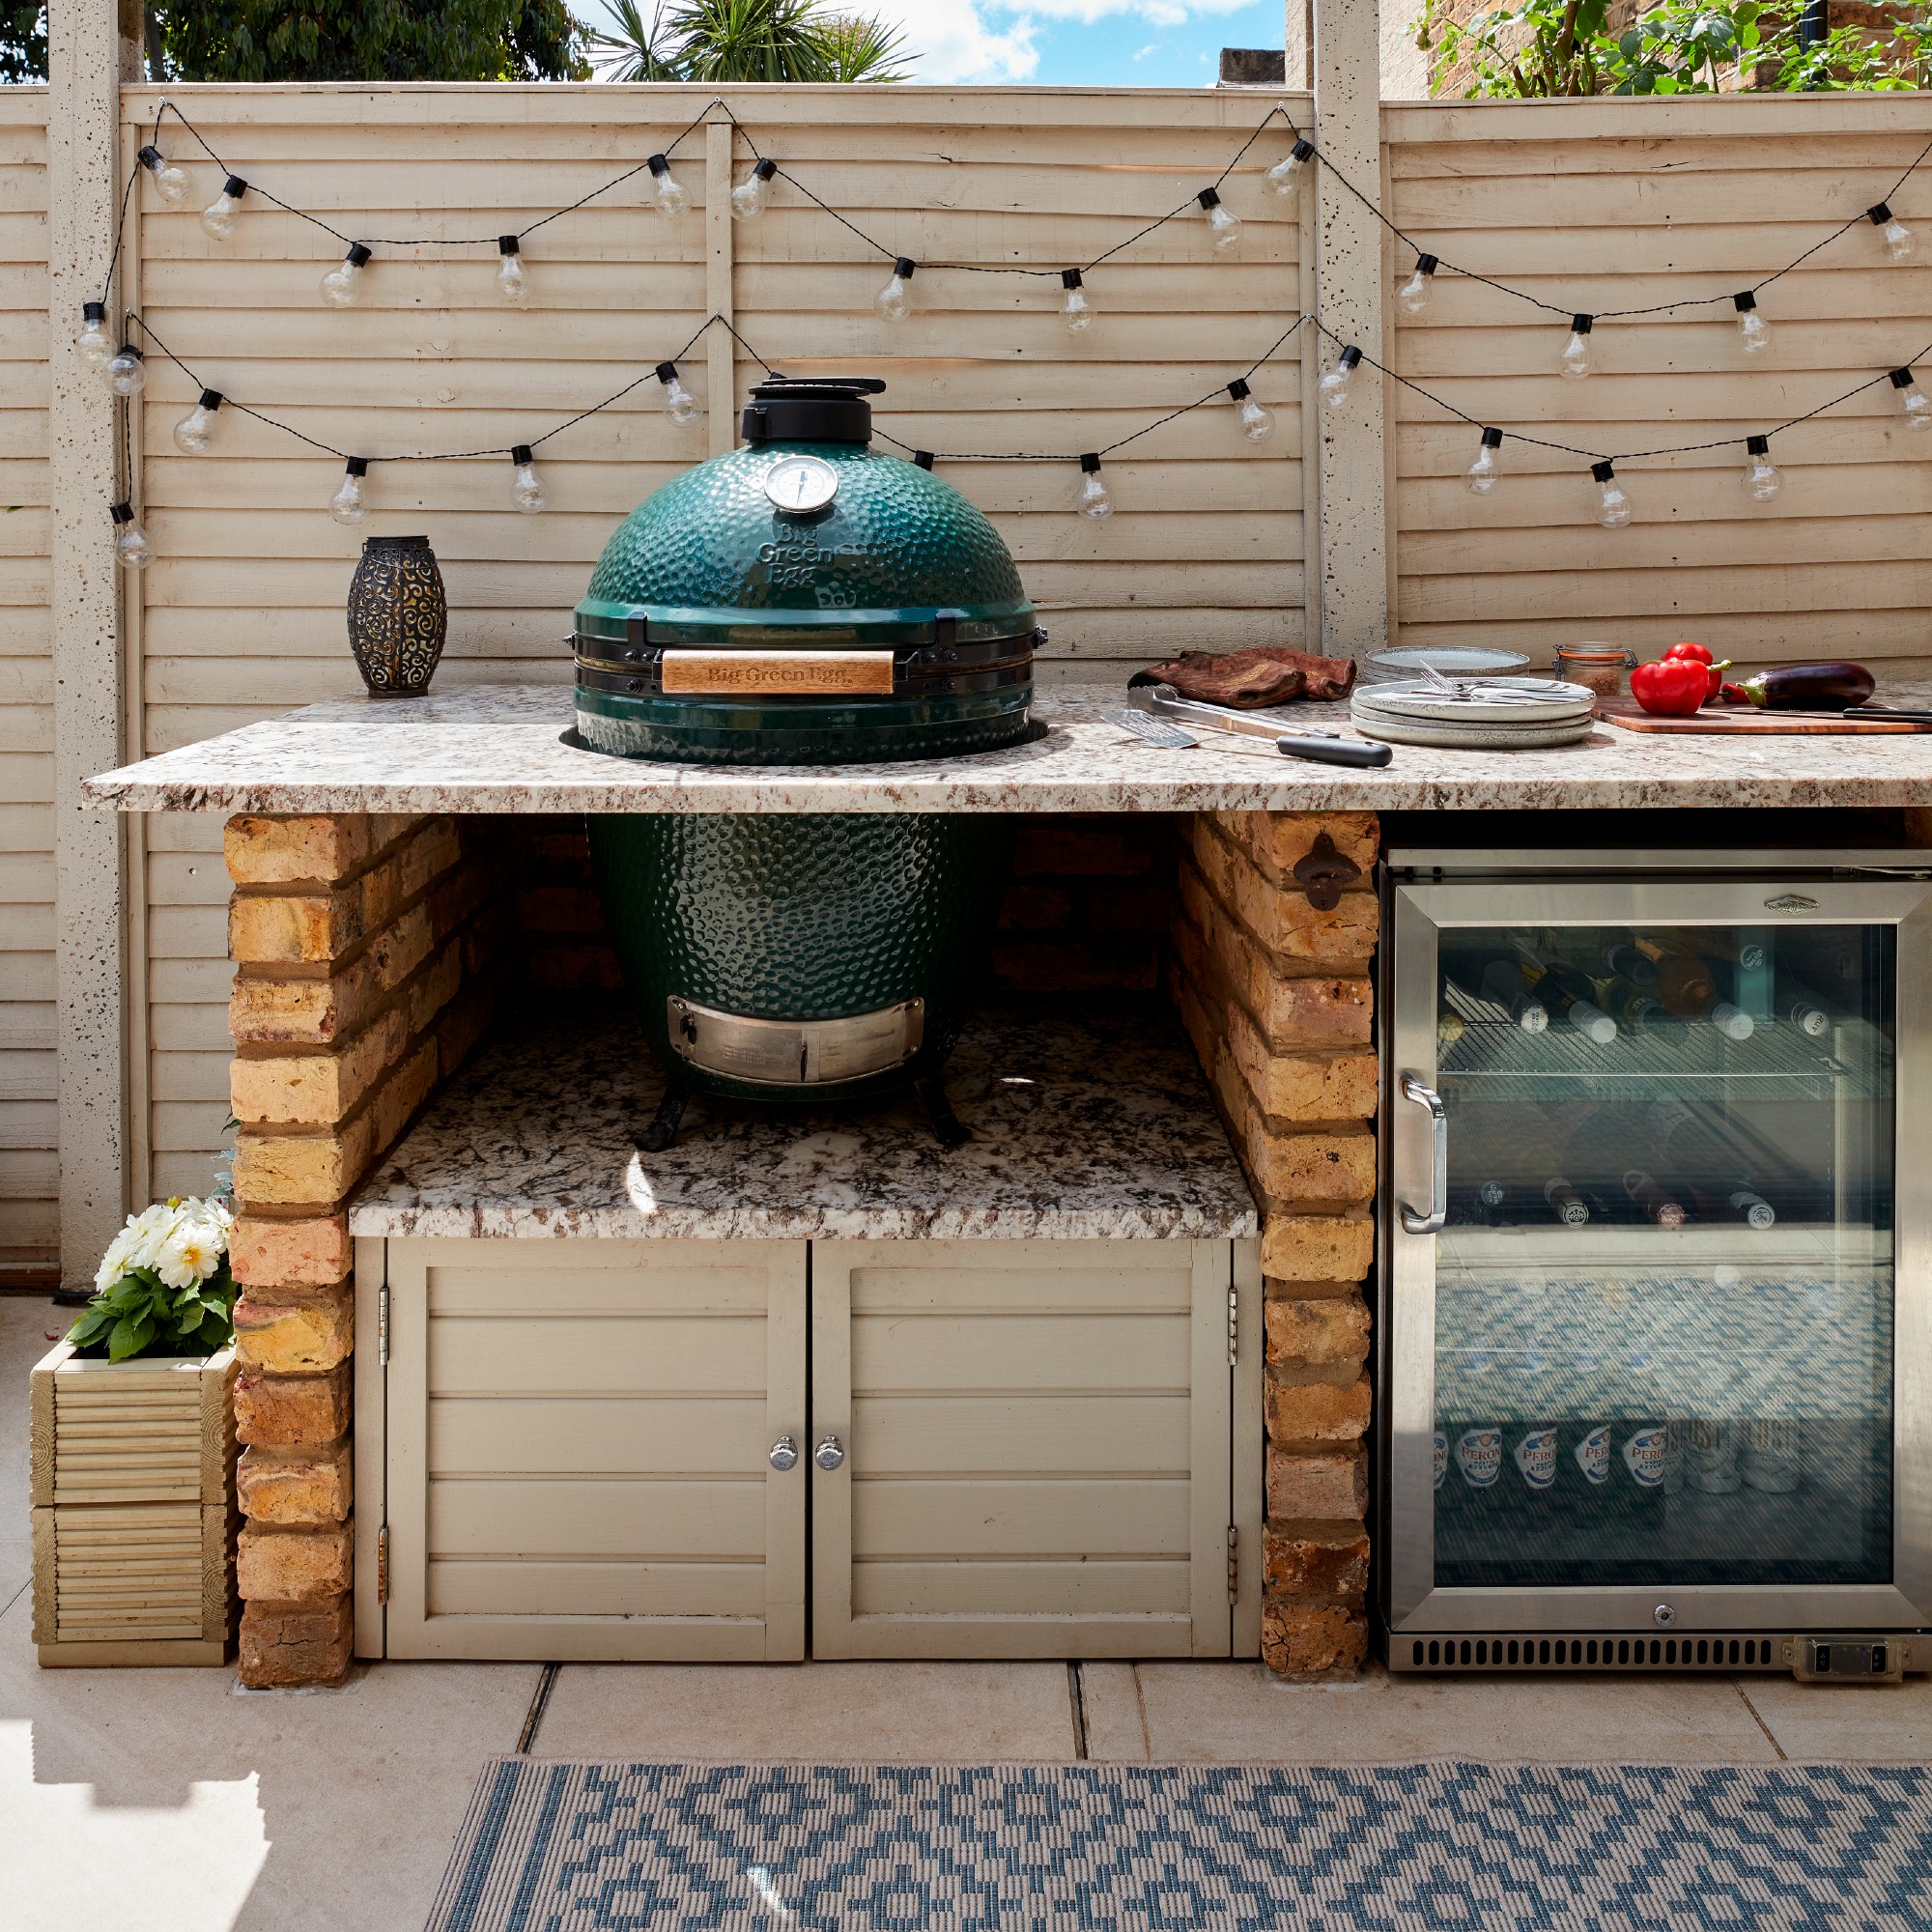 An outdoor kitchen on a patio with string lights decorating the fence